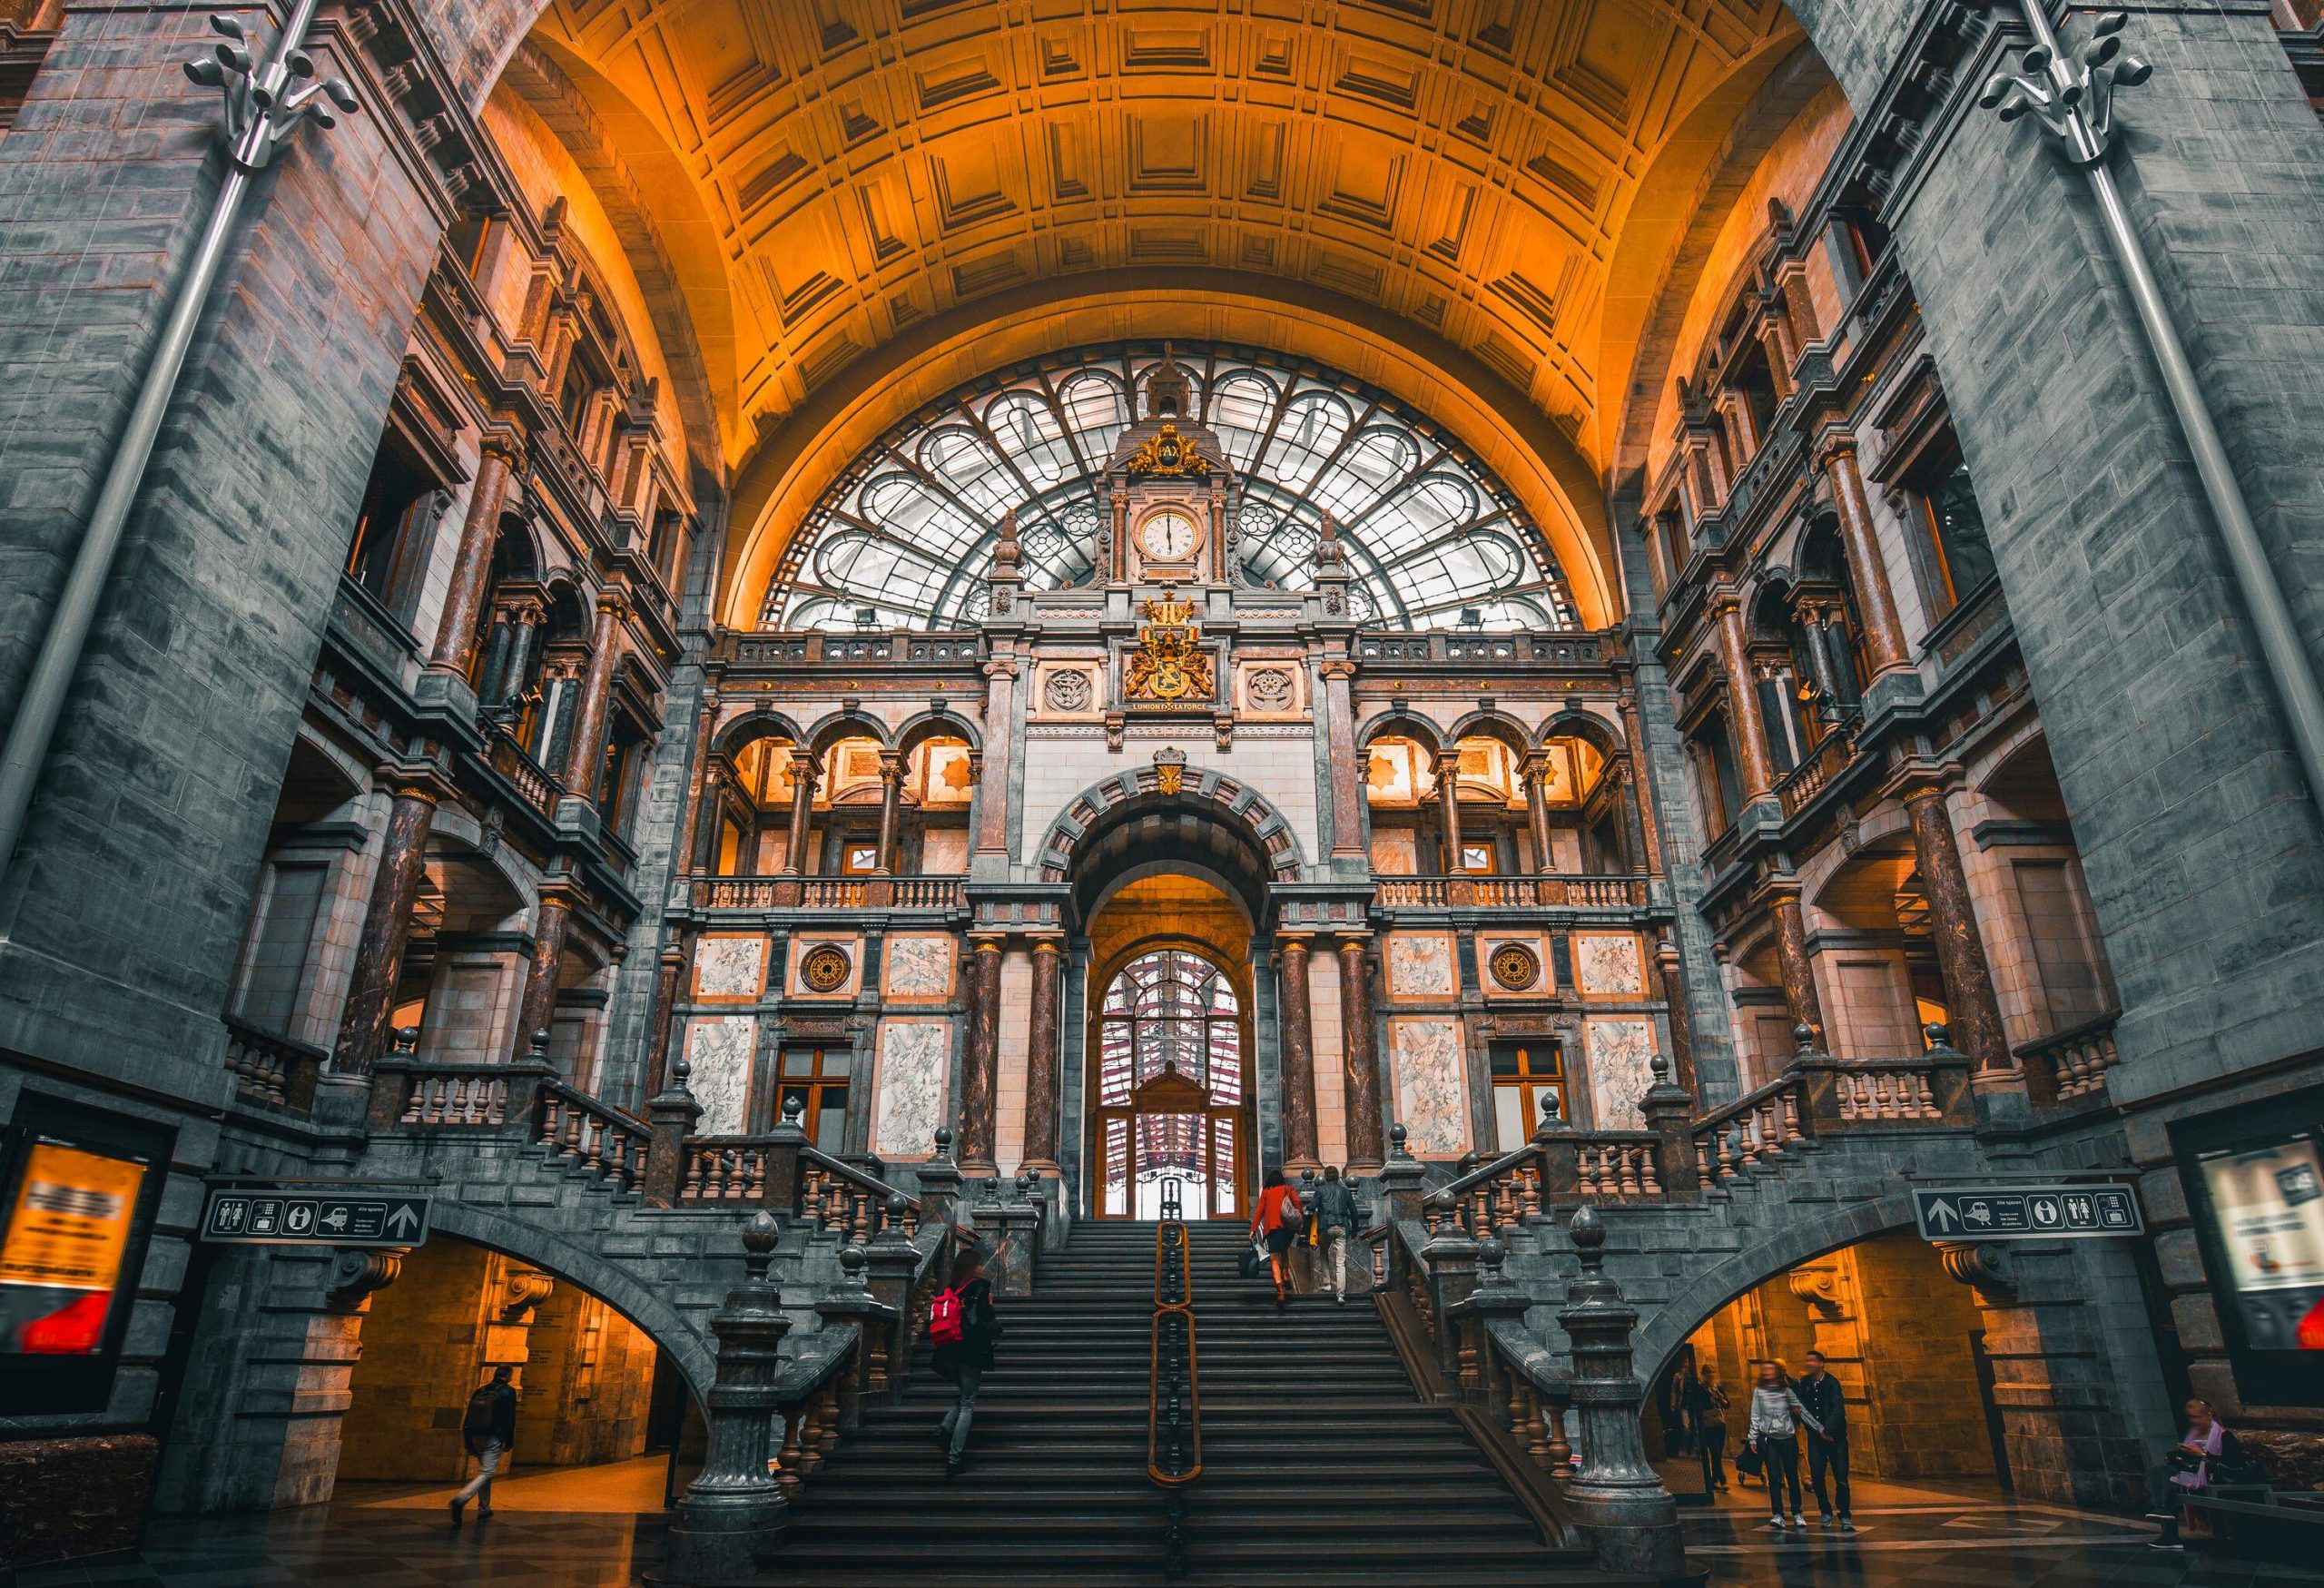 Antwerpen-Centraal railway station's glorious interior, with people climbing up the stairs and walking through the halls.